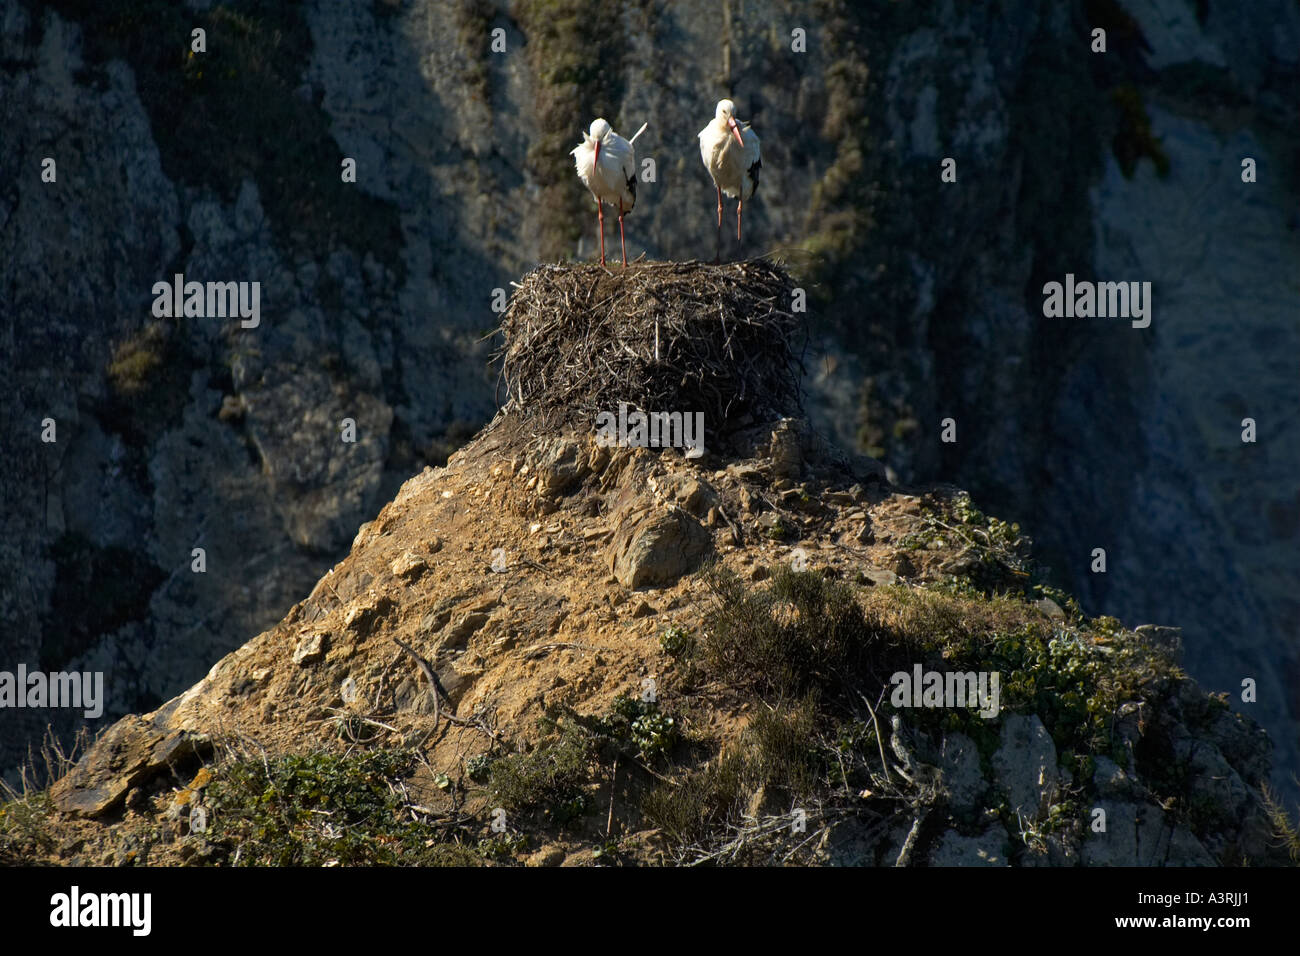 Storks at rest on craggy cliffs at Azenha. Algarve, Portugal, Europe EU Stock Photo